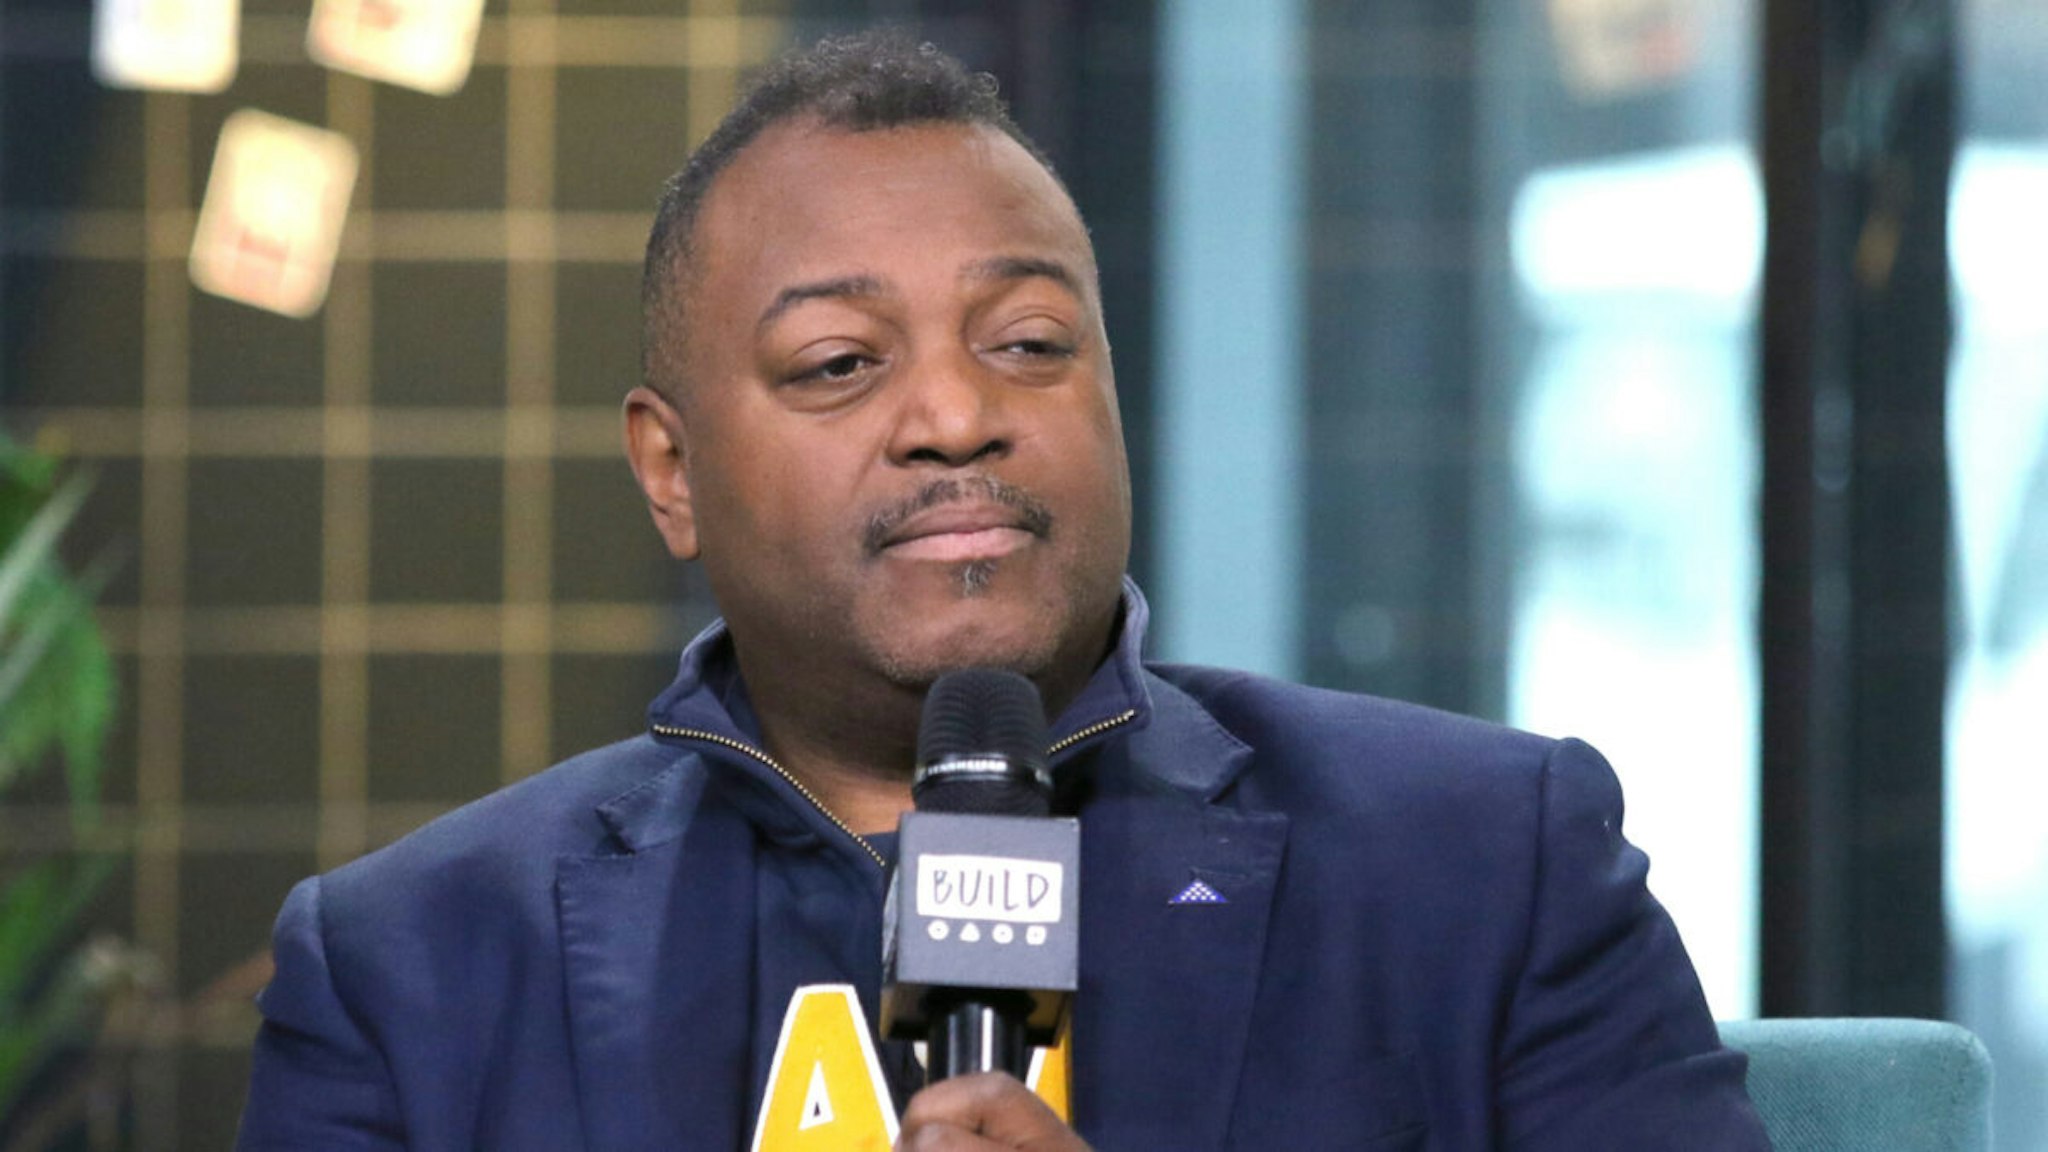 Author Malcolm Nance attends the Build Series to discuss his new book "The Plot To Betray America" at Build Studio on November 14, 2019 in New York City.